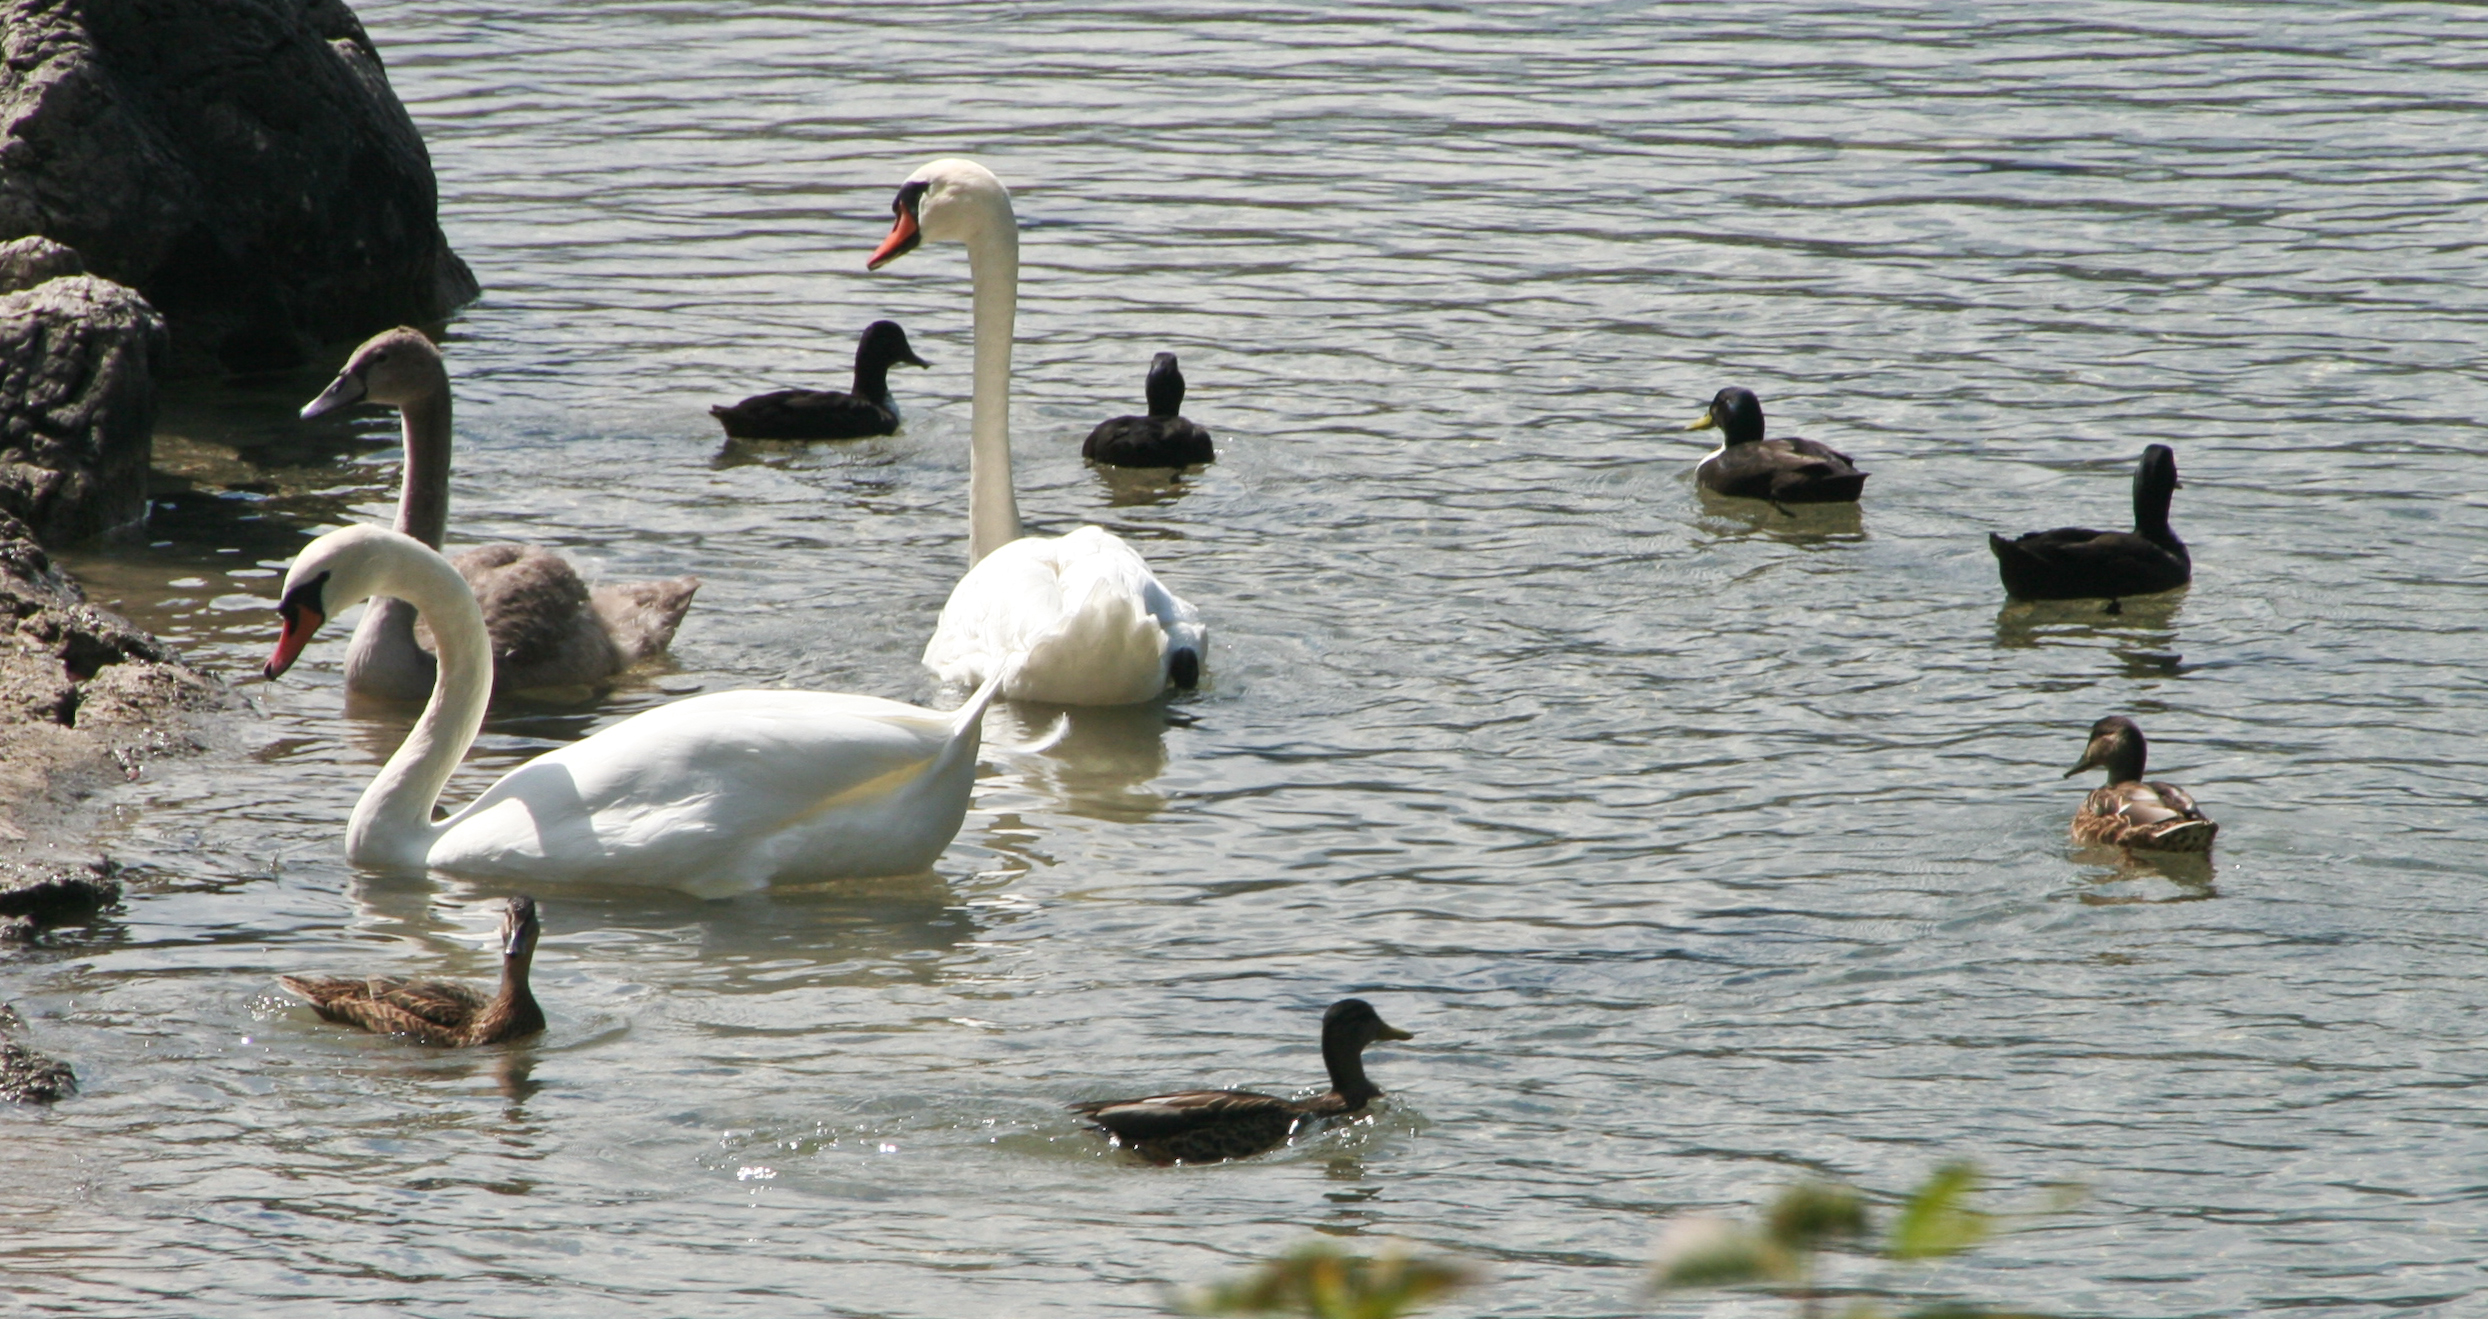 ducks are swimming in a lake and some swans are hanging out